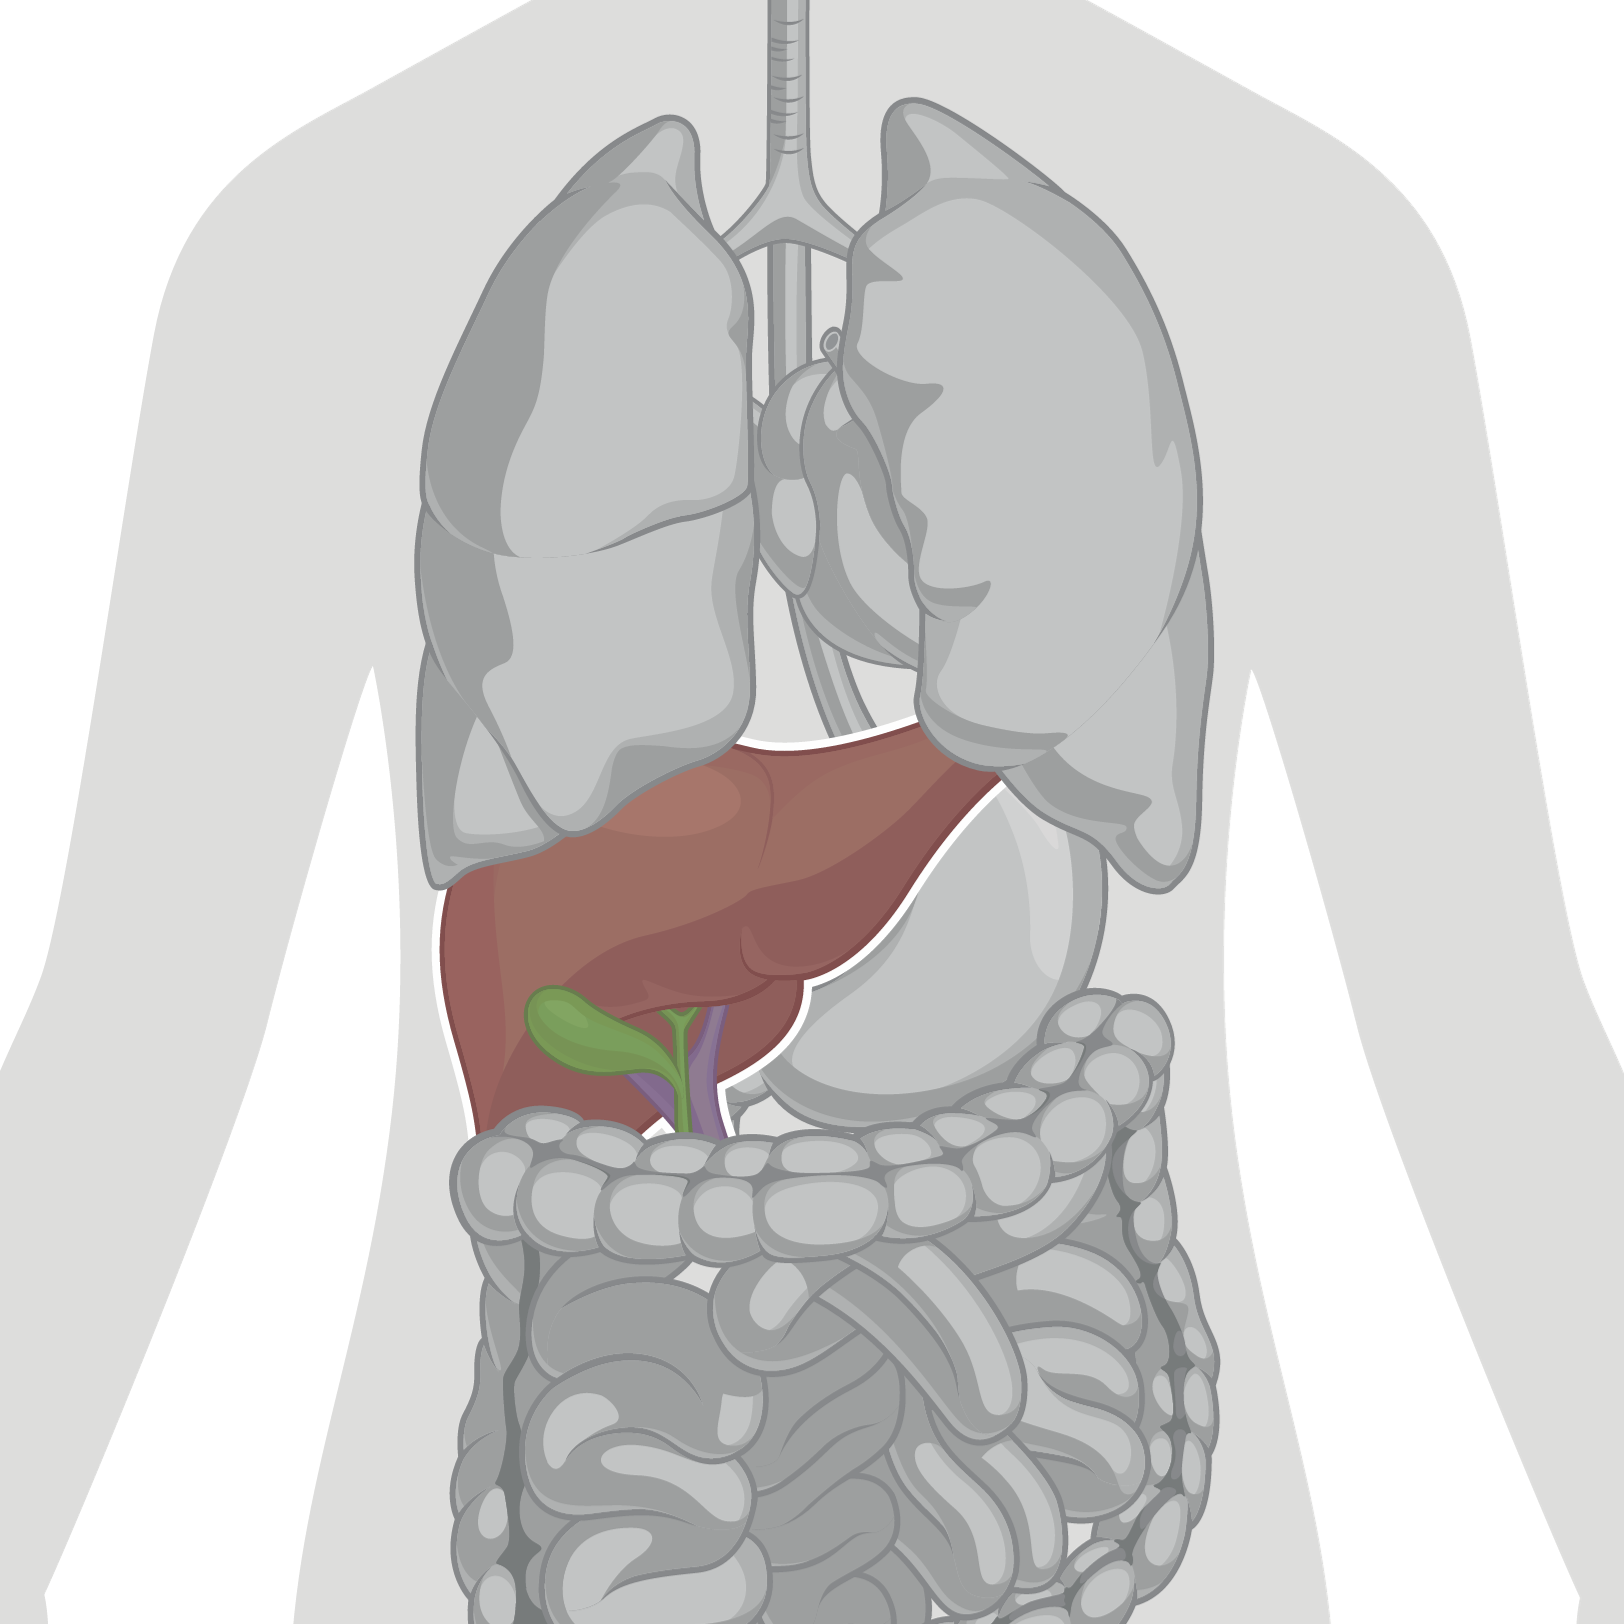 Graphic showing a human torso with internal organs, highlighting the position of the liver